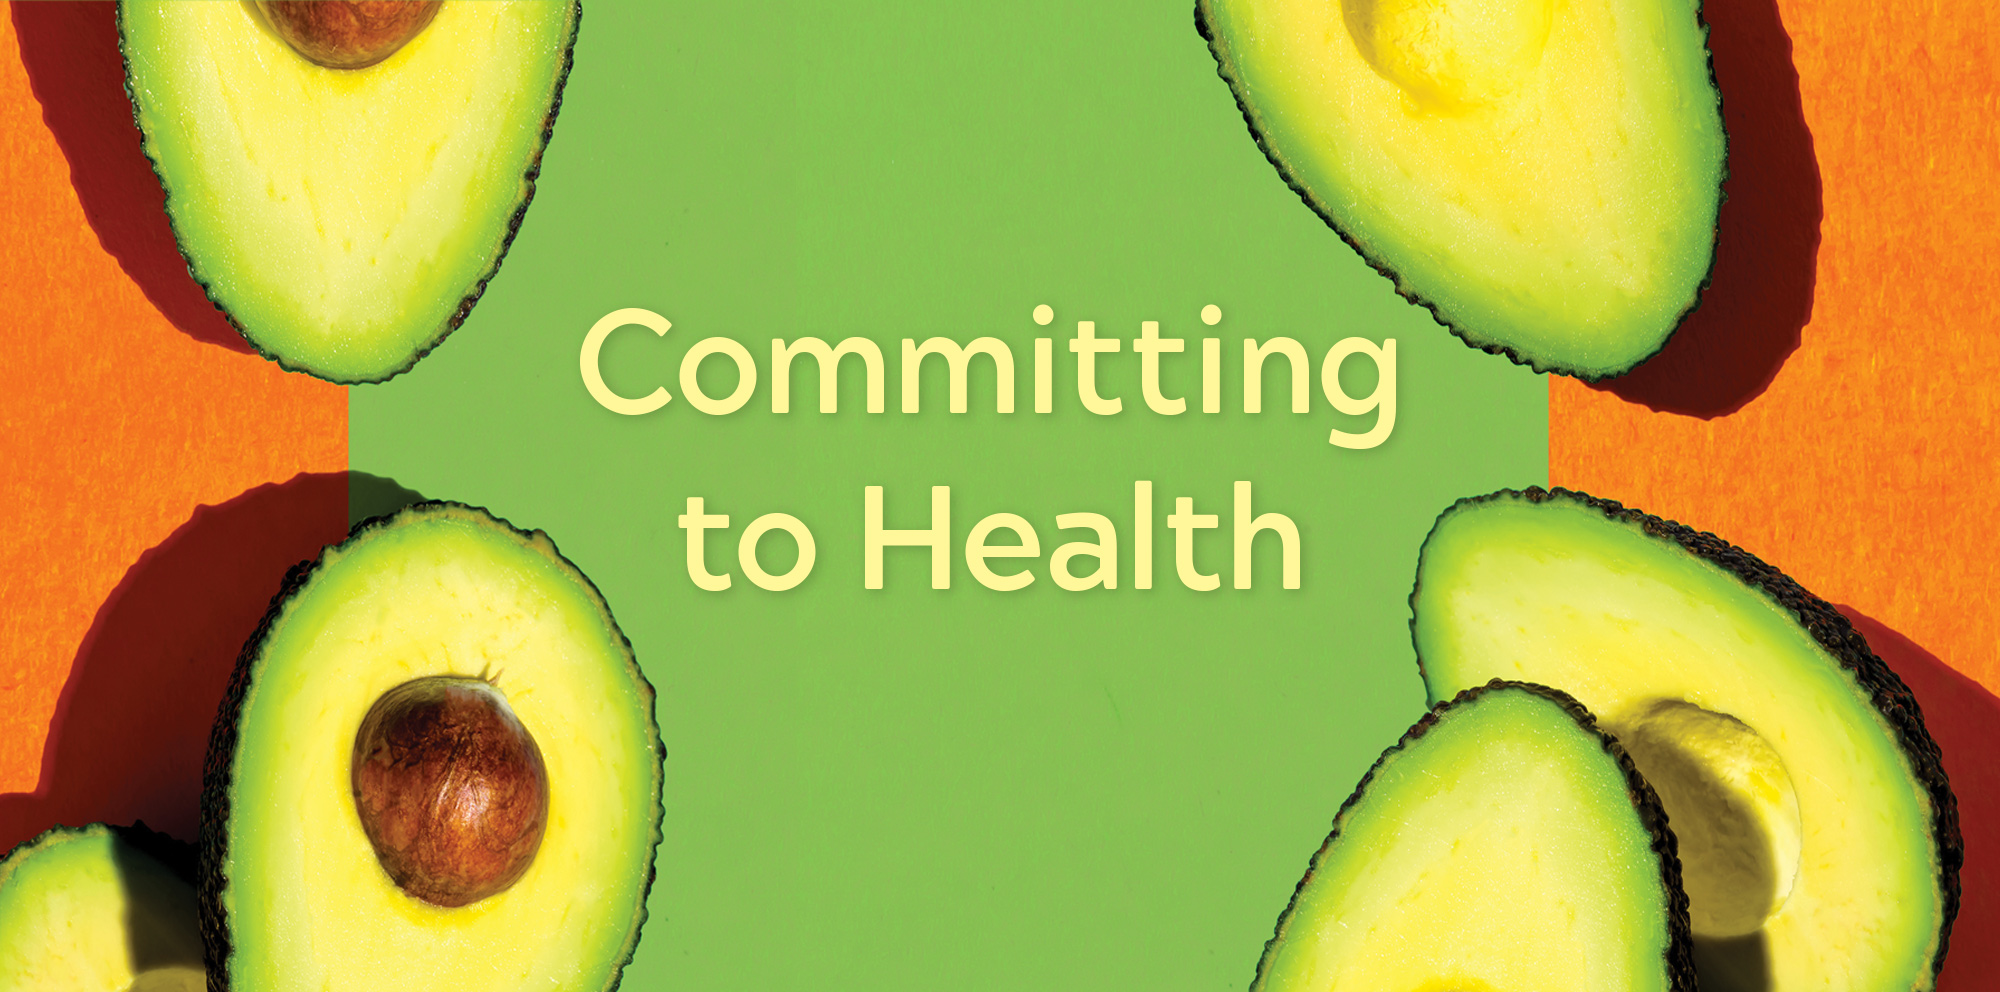 Committing to health with image of avocados